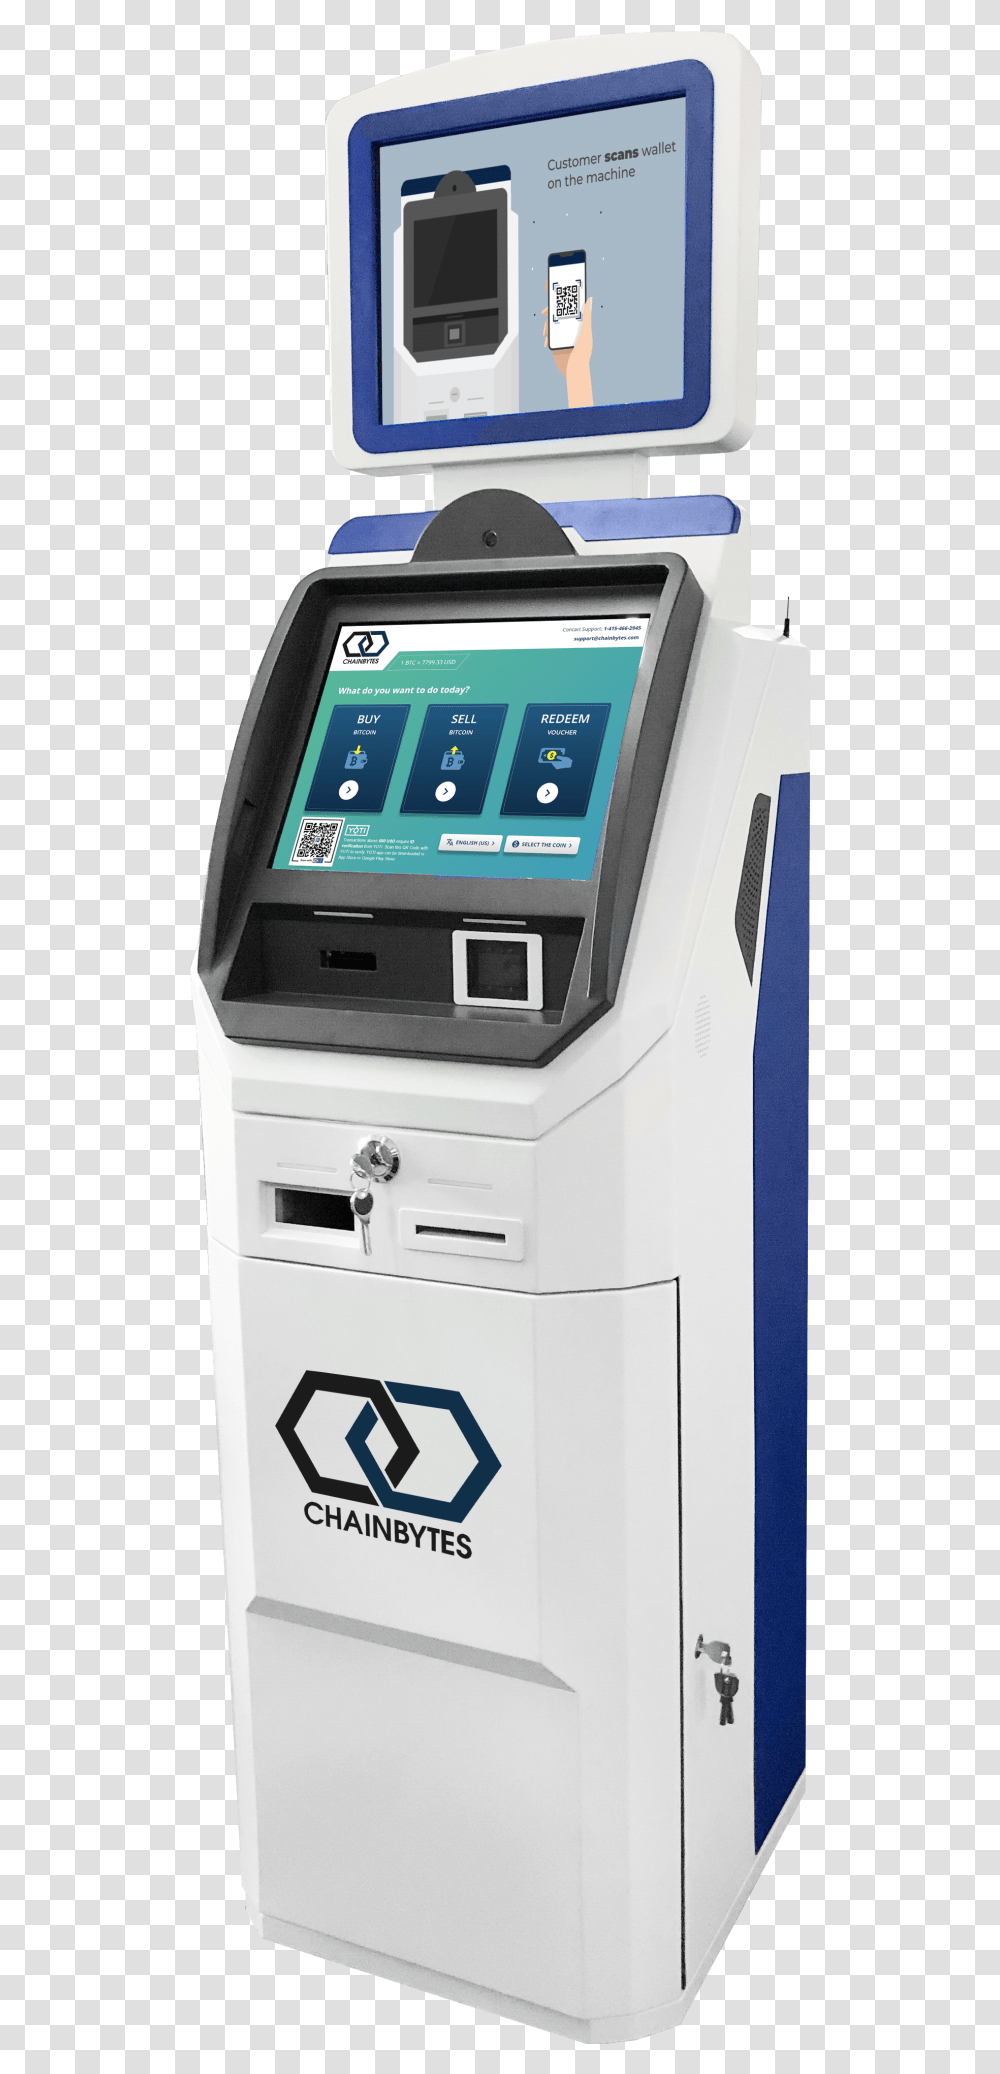 Bitcoin Atm With 2 Screens By Chainbytes Atm Machine Alarm, Cash Machine, Kiosk, Word Transparent Png